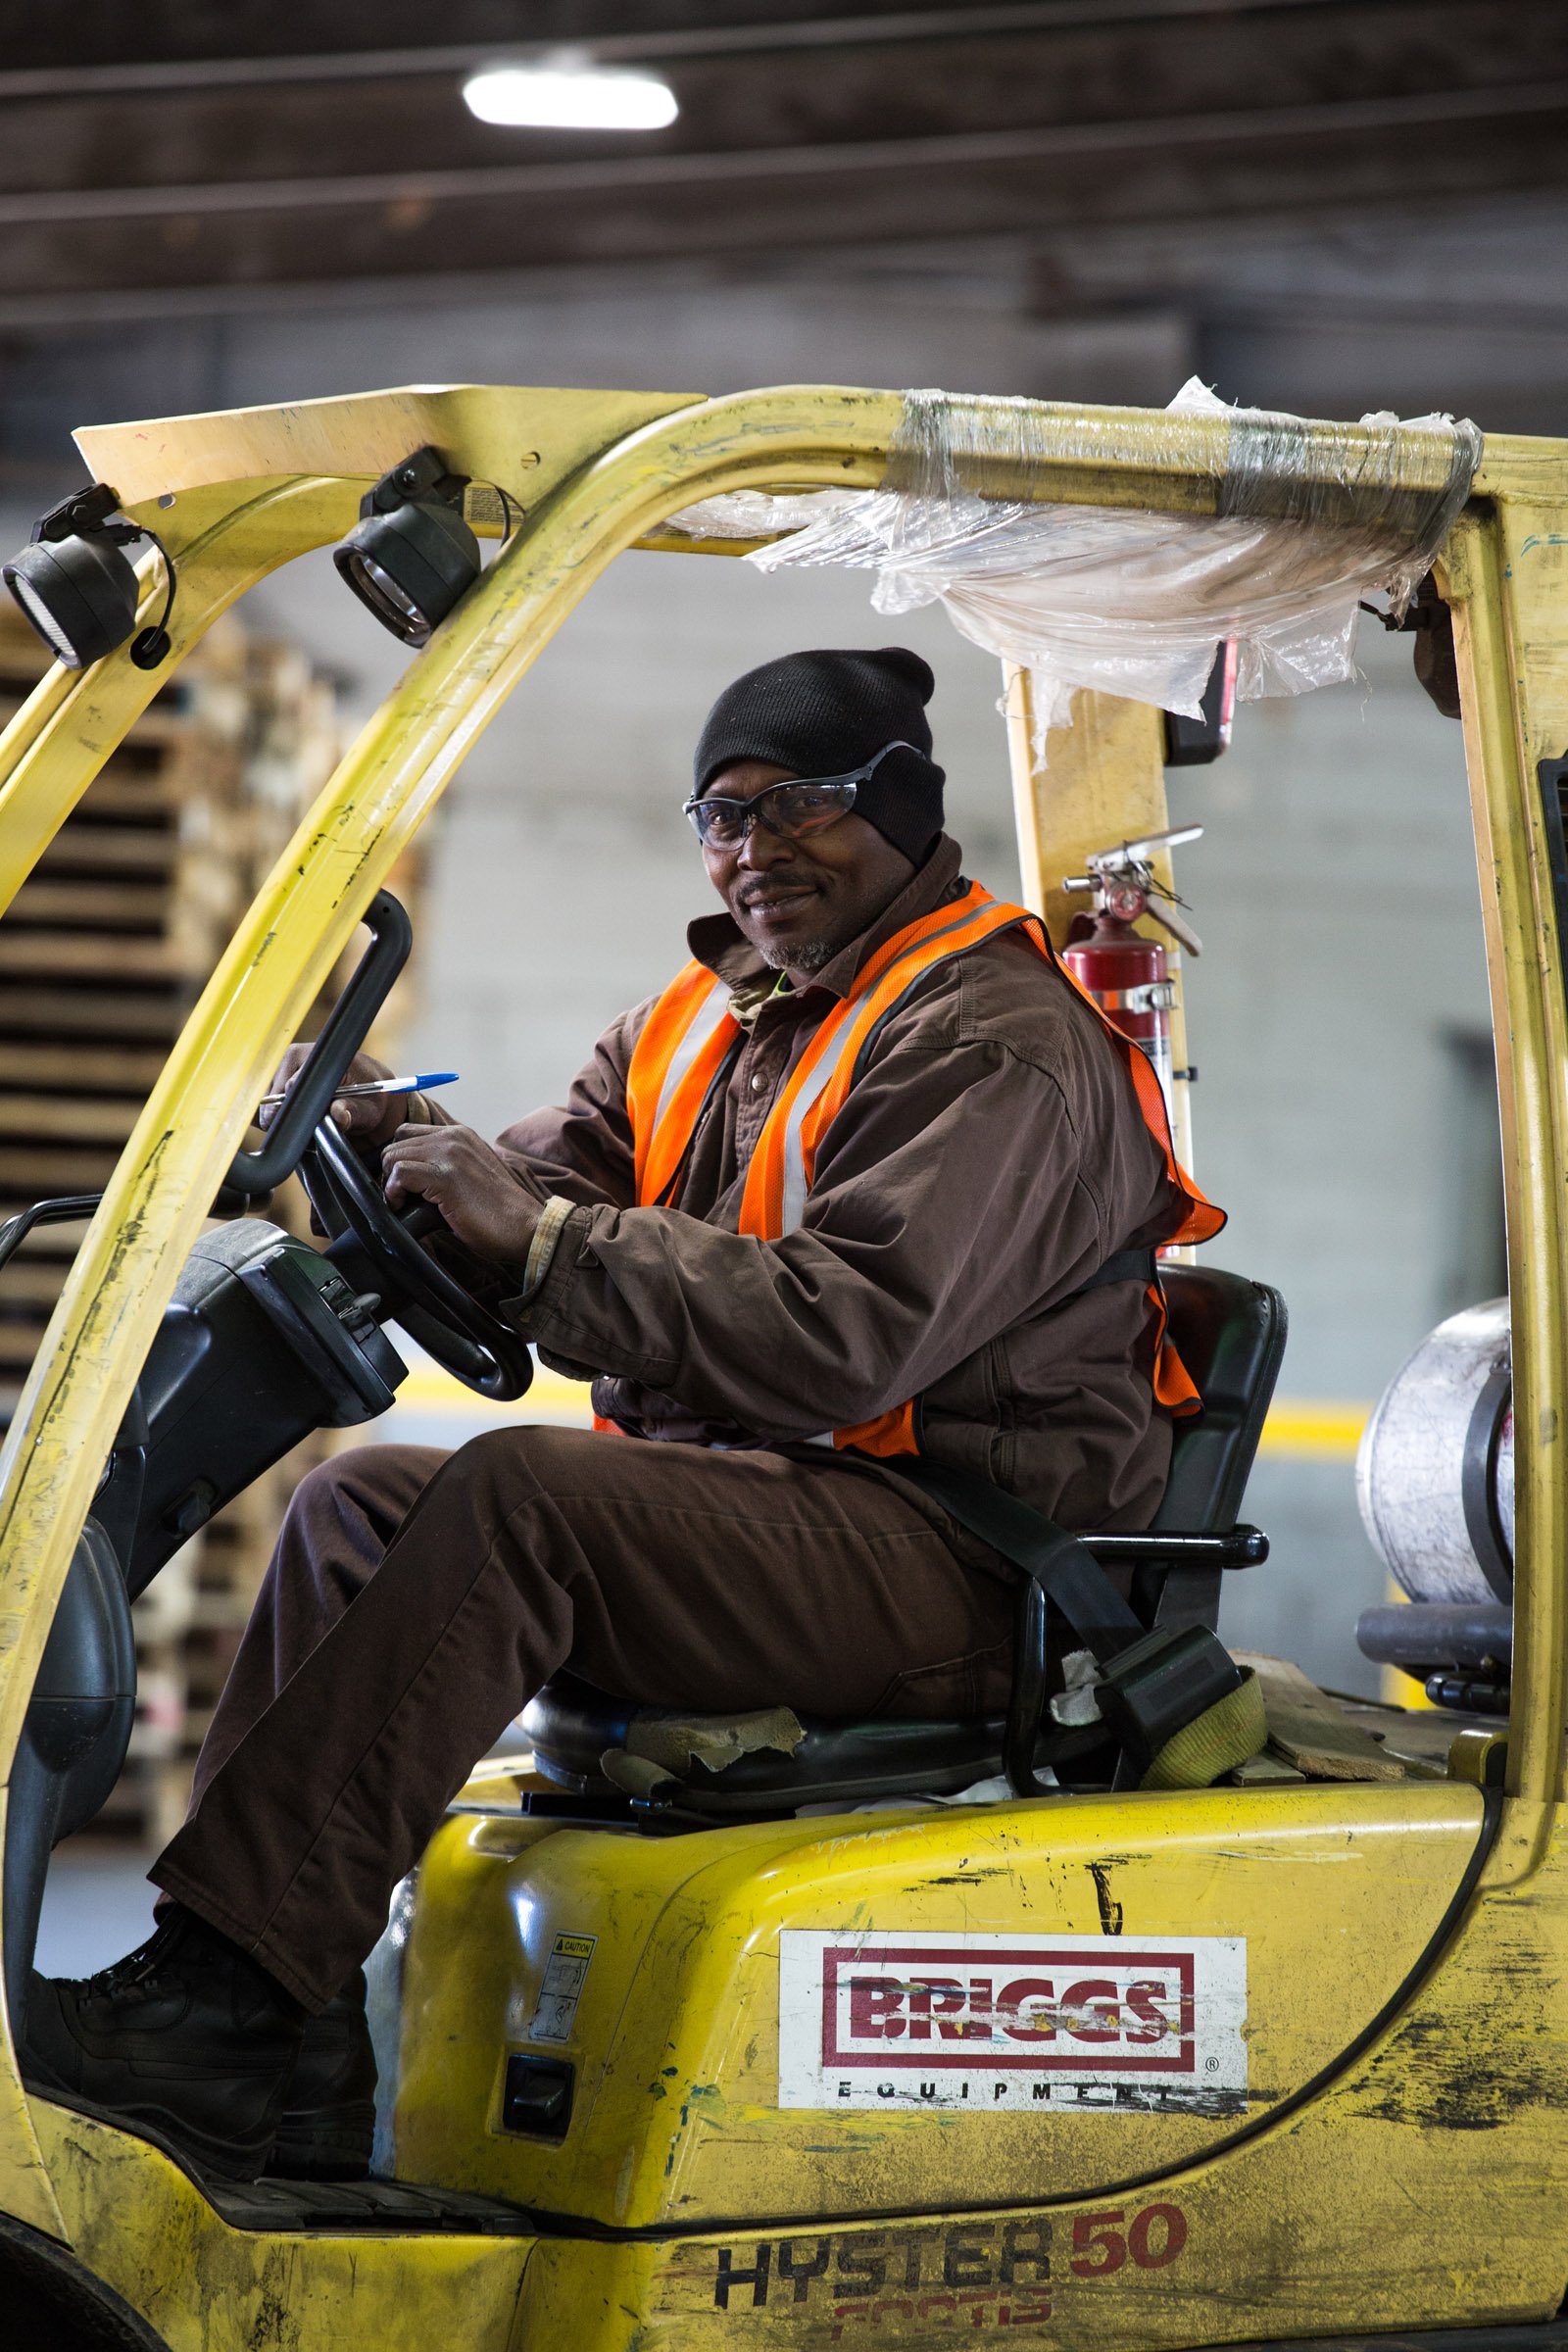 A smiling worker driving the forklift